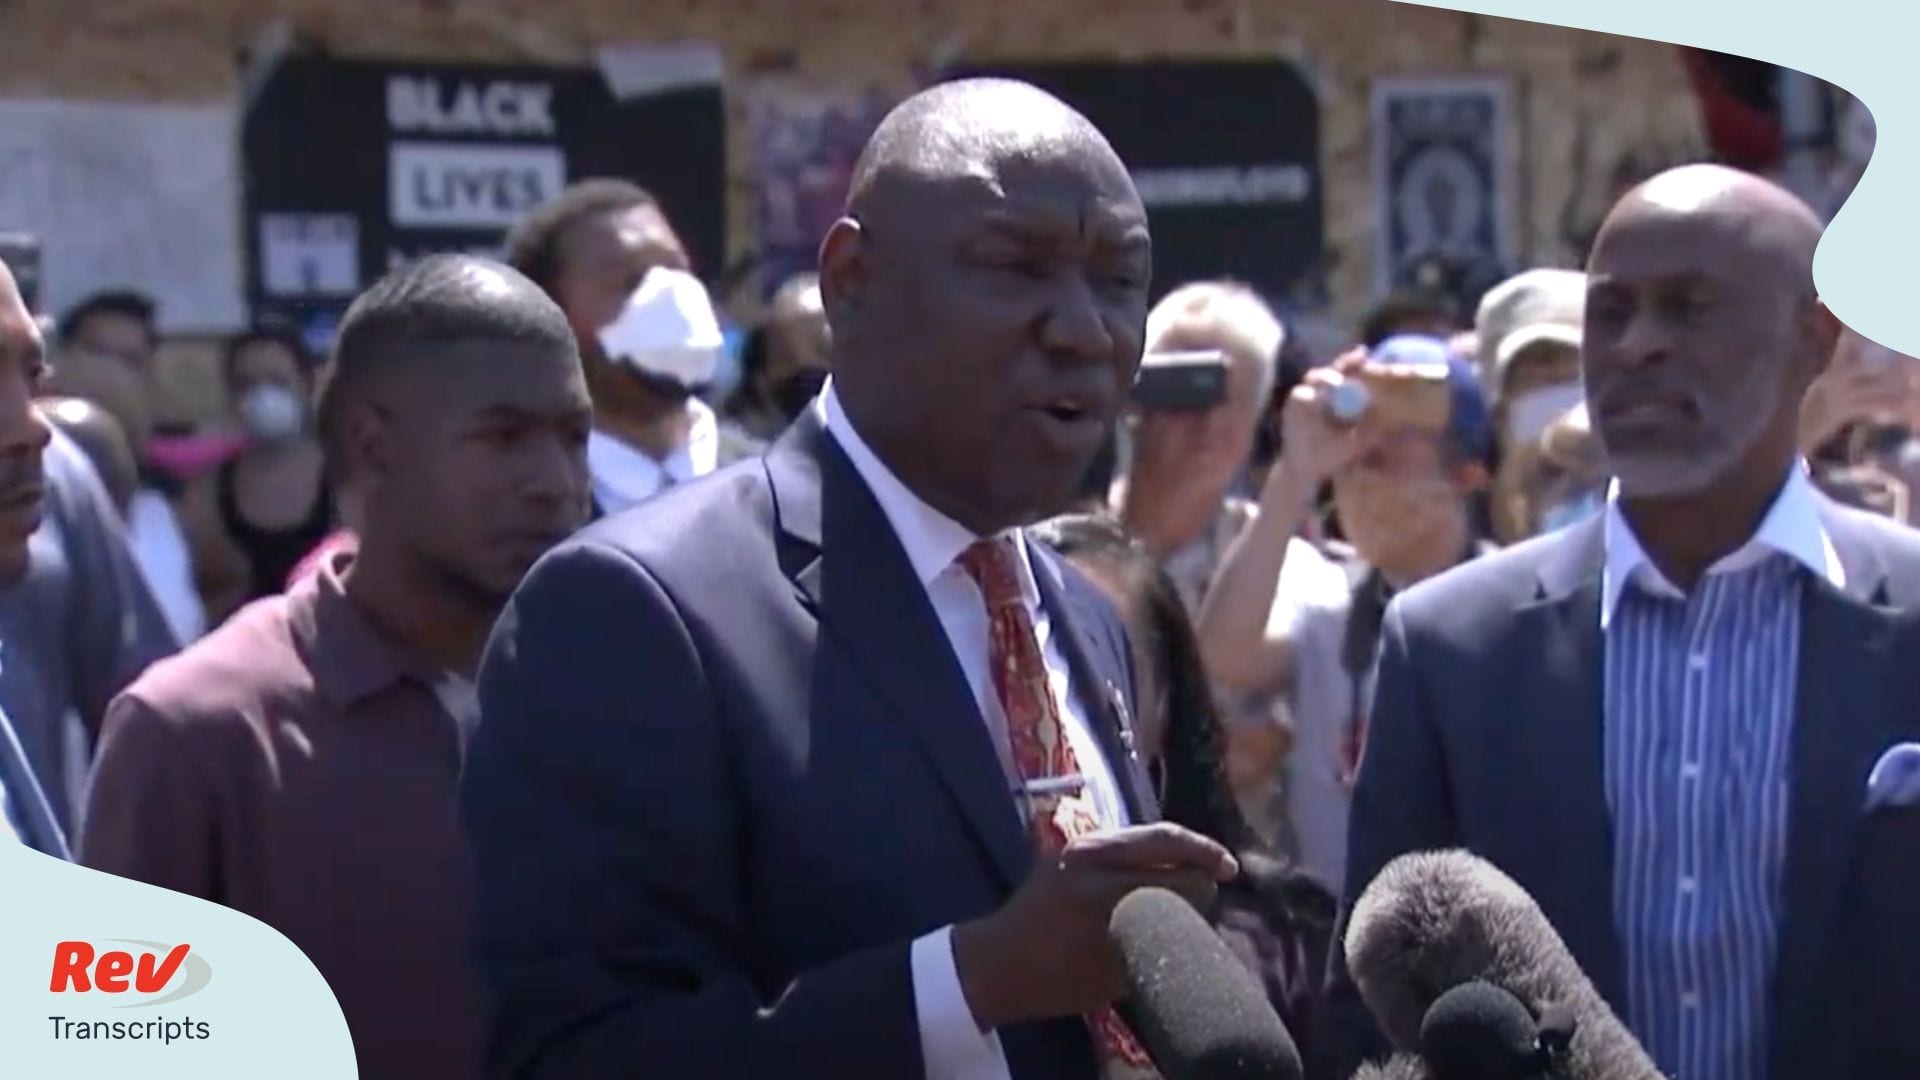 Civil Rights Attorney Ben Crump & George Floyd Family Press Conference